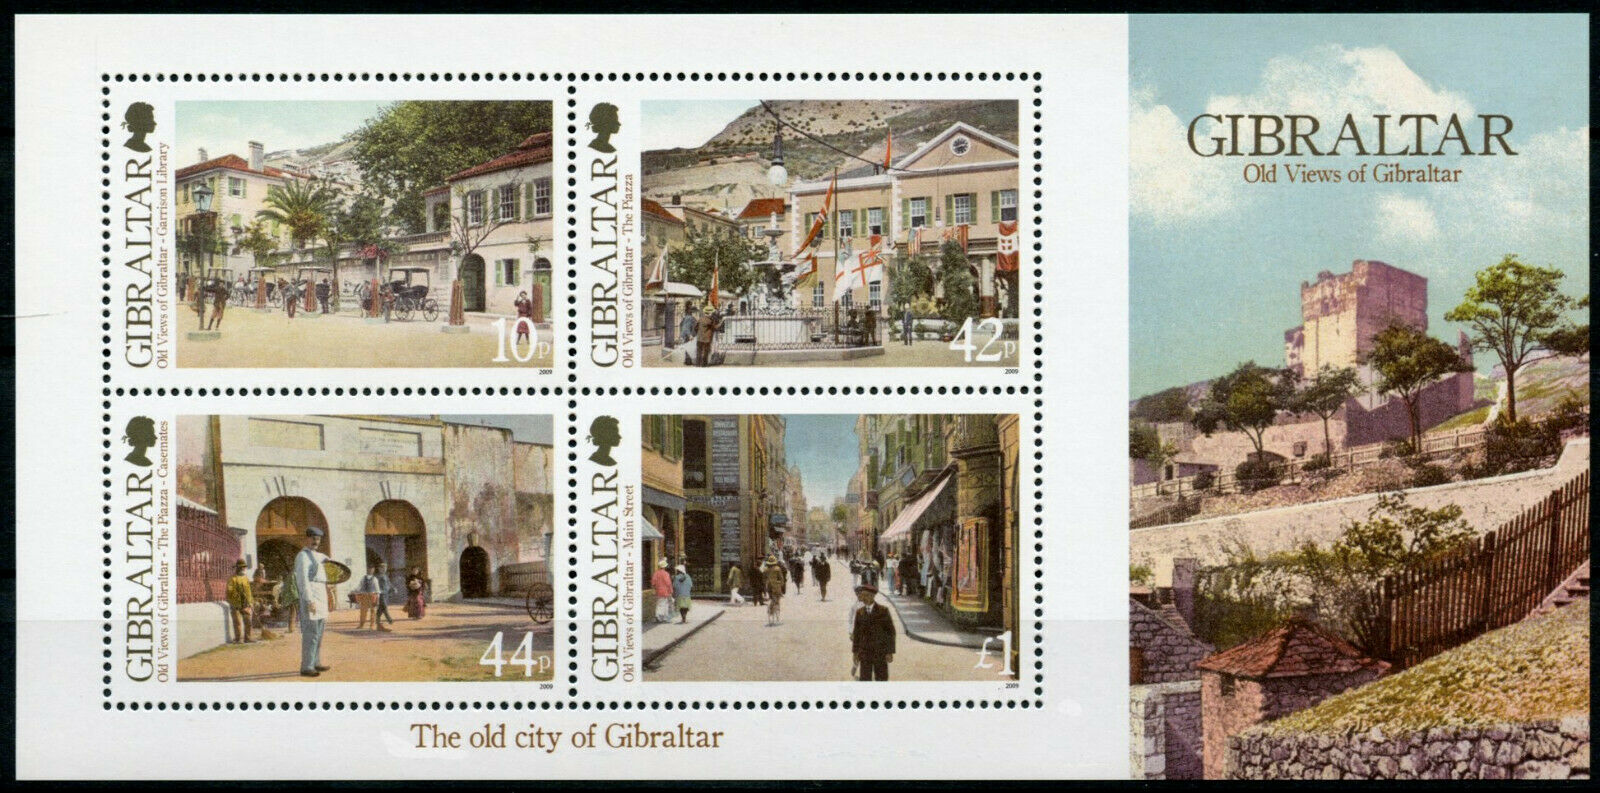 Gibraltar 2009 MNH Landscapes Stamps Old Views Part I Cities Architecture 4v M/S